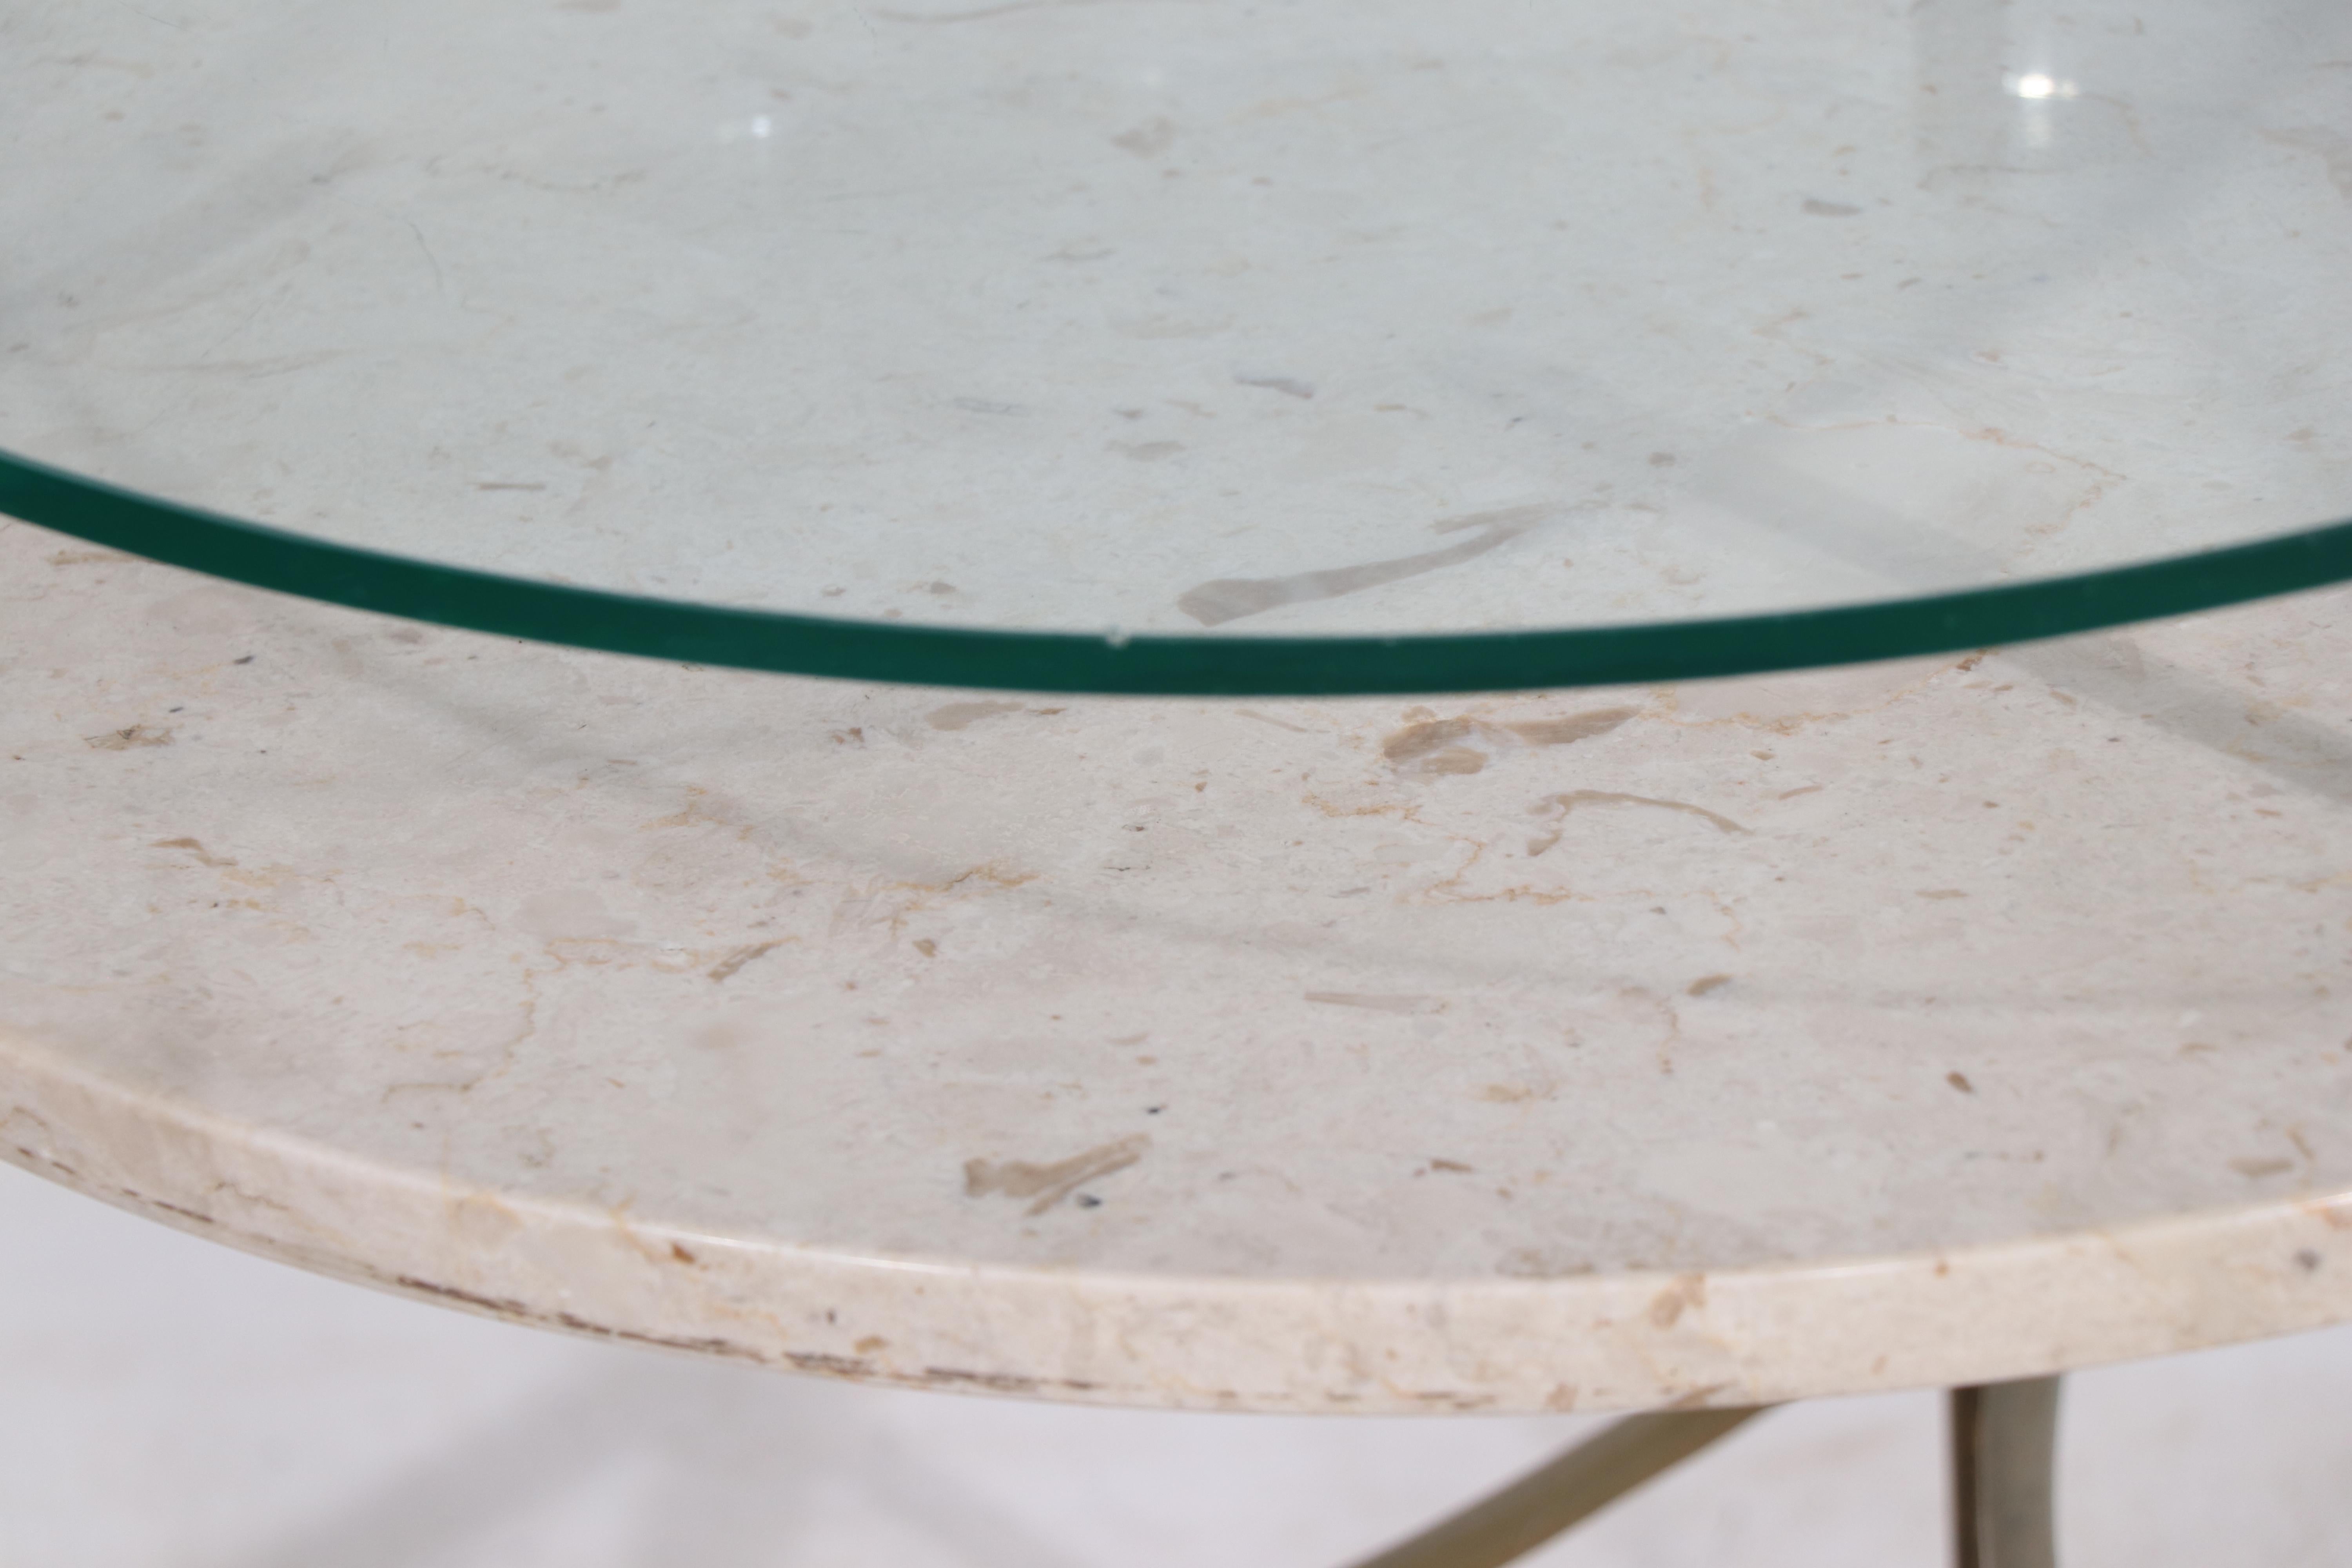 Chic, architectural two tier side table having a plate glass top, over a second level marble shelf, all supported by brass vertical elements.
The top glass shelf is 23.5 H, lower marble shelf 20 H, glass shelf has an inconsequential pin flake flaw